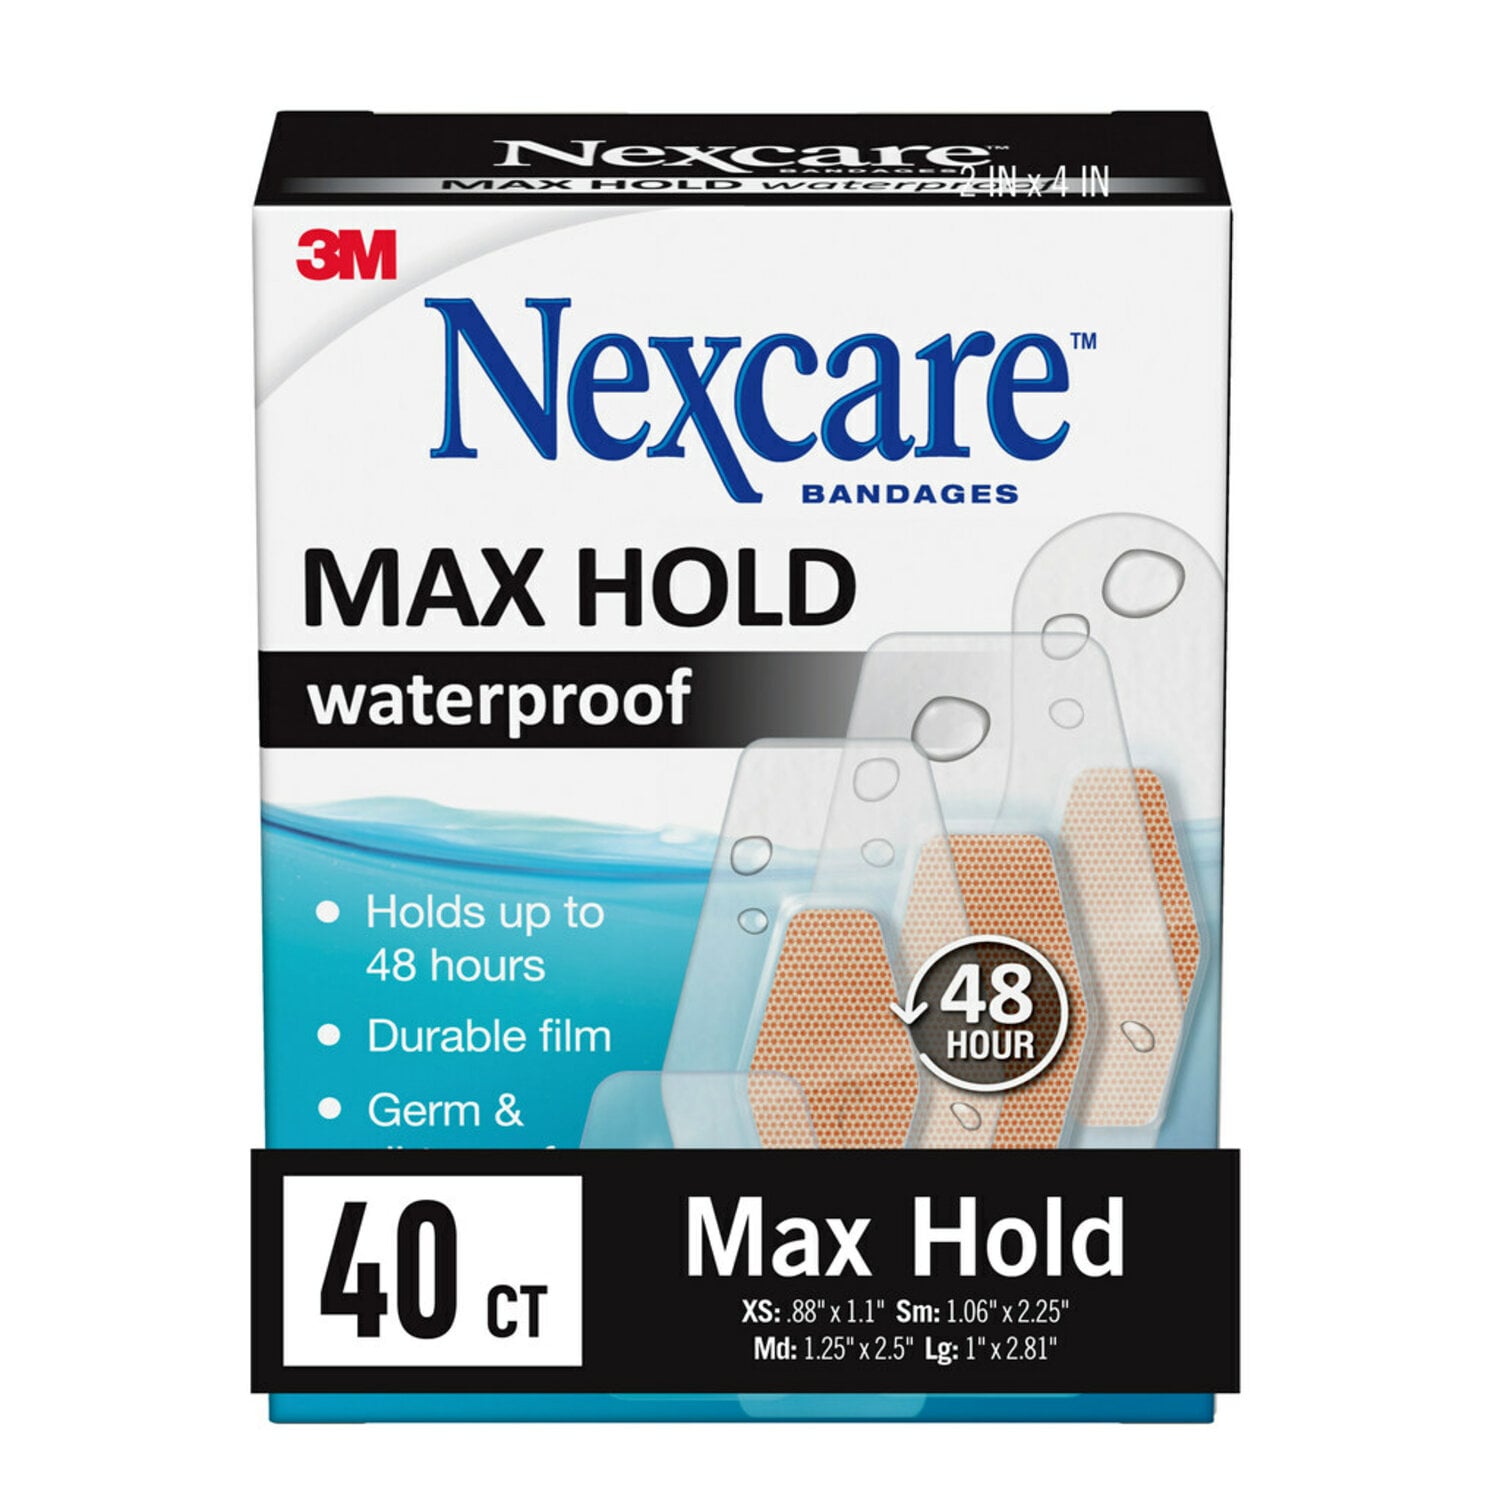 7100288523 - Nexcare Max Hold Waterproof Bandages MHW-40-NI, Assorted, 40 ct, Value Pack